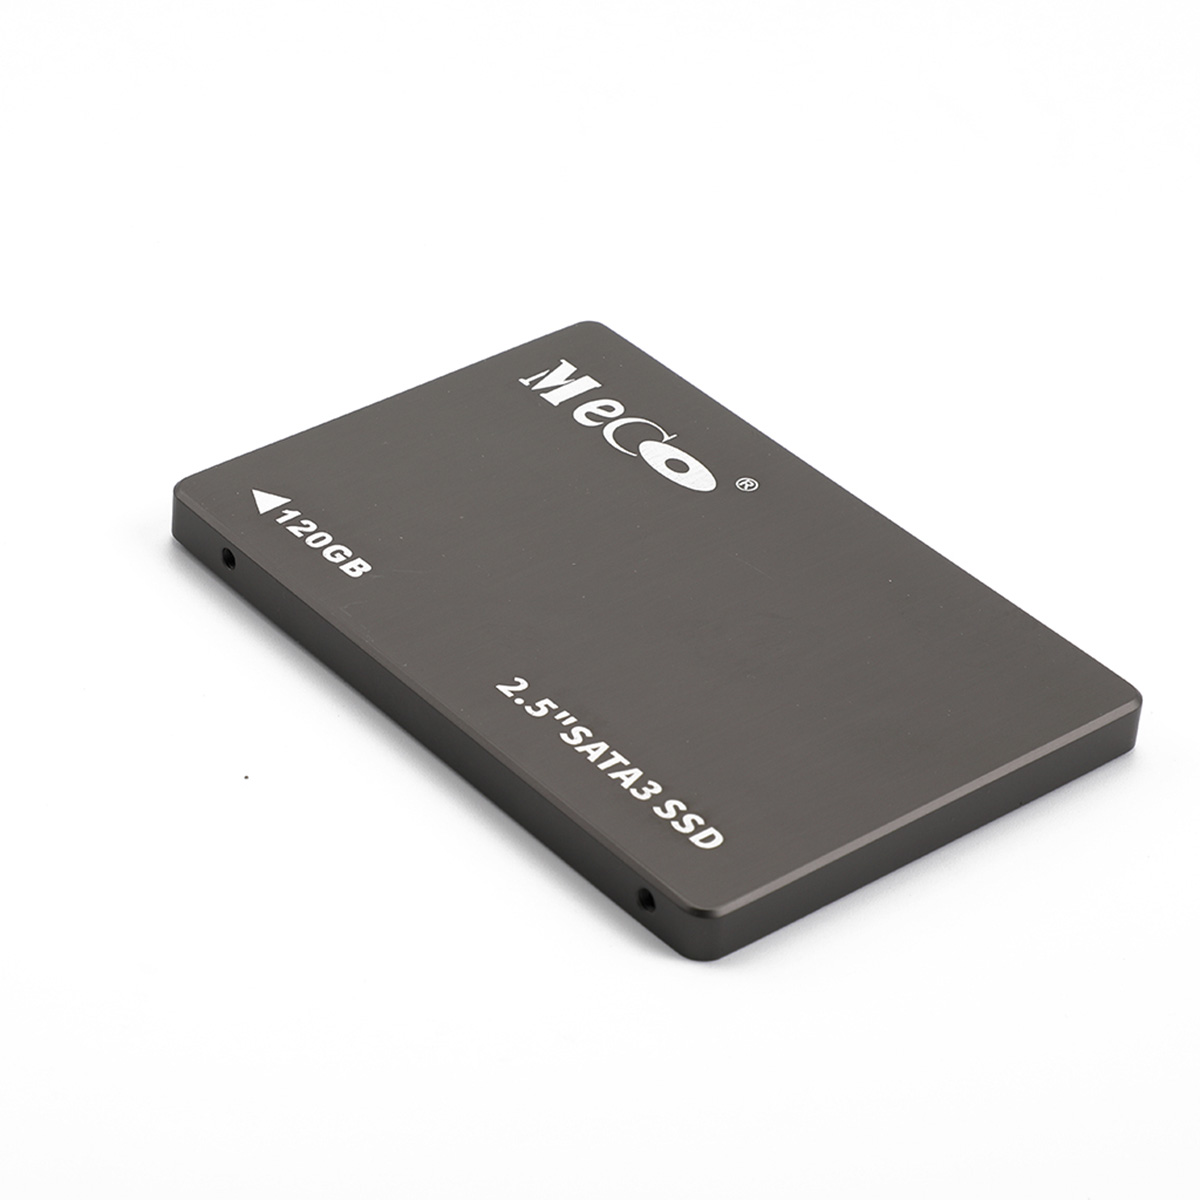 MECO-120GB-SSD-25inch-SATA-III-High-Speed-Solid-State-Disk-Hard-Drive-MLC-NAND-FLASH-1292159